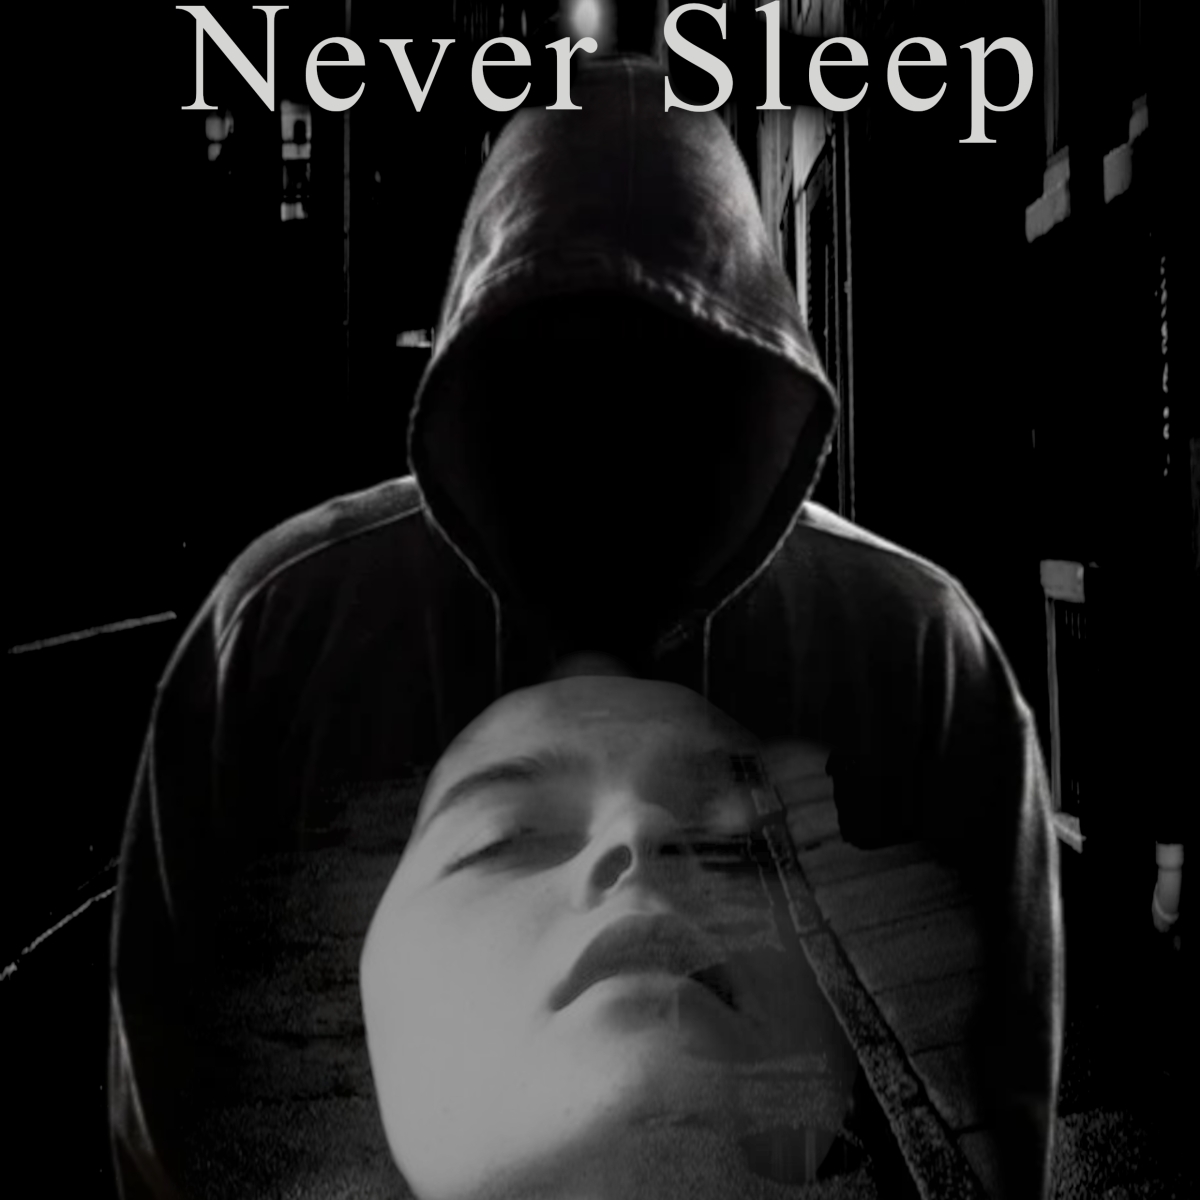 Victims Never Sleep – Now Published!